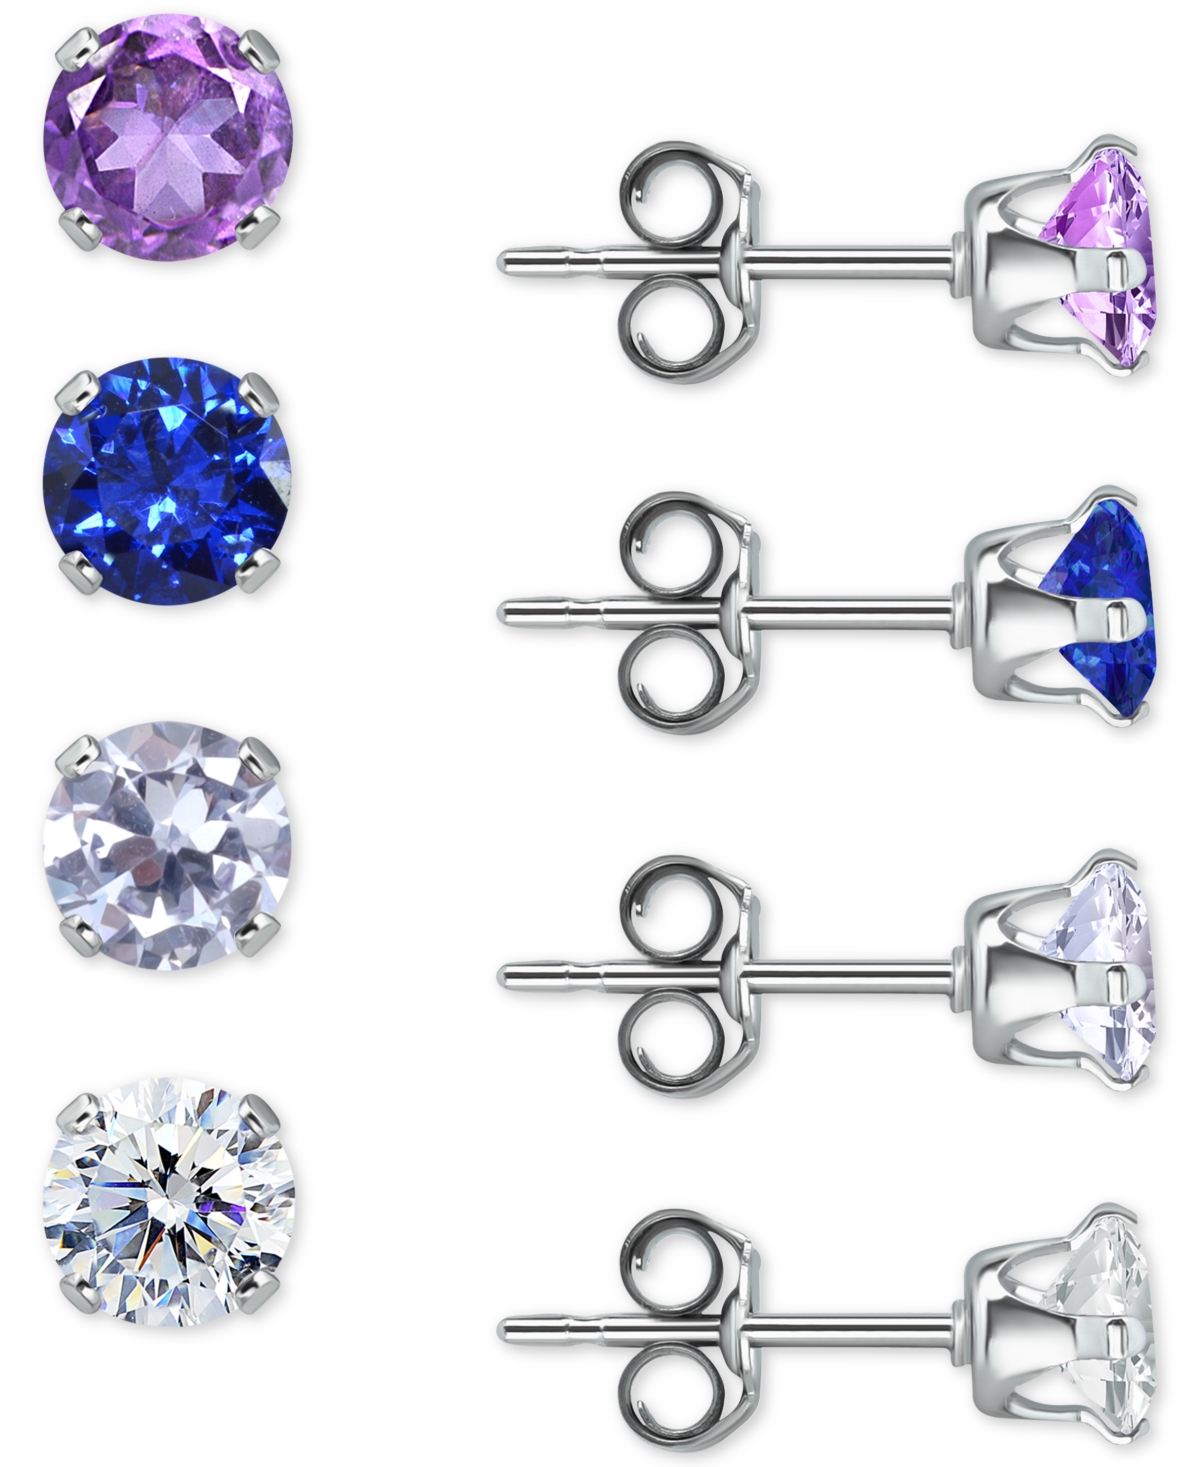 Giani Bernini 4-pc. Set Multicolor Cubic Zirconia Stud Earrings In Sterling Silver, Created For Macy's